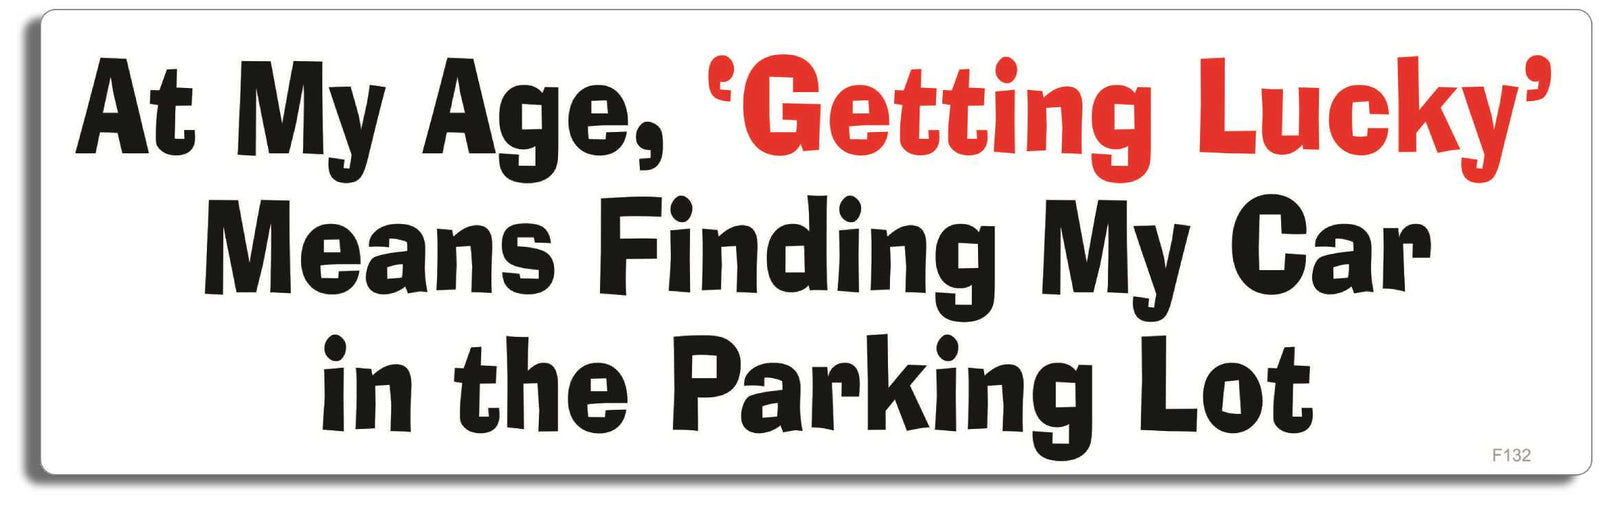 Refrigerator & Car Magnets / Stickers - Car Stickers - Page 1